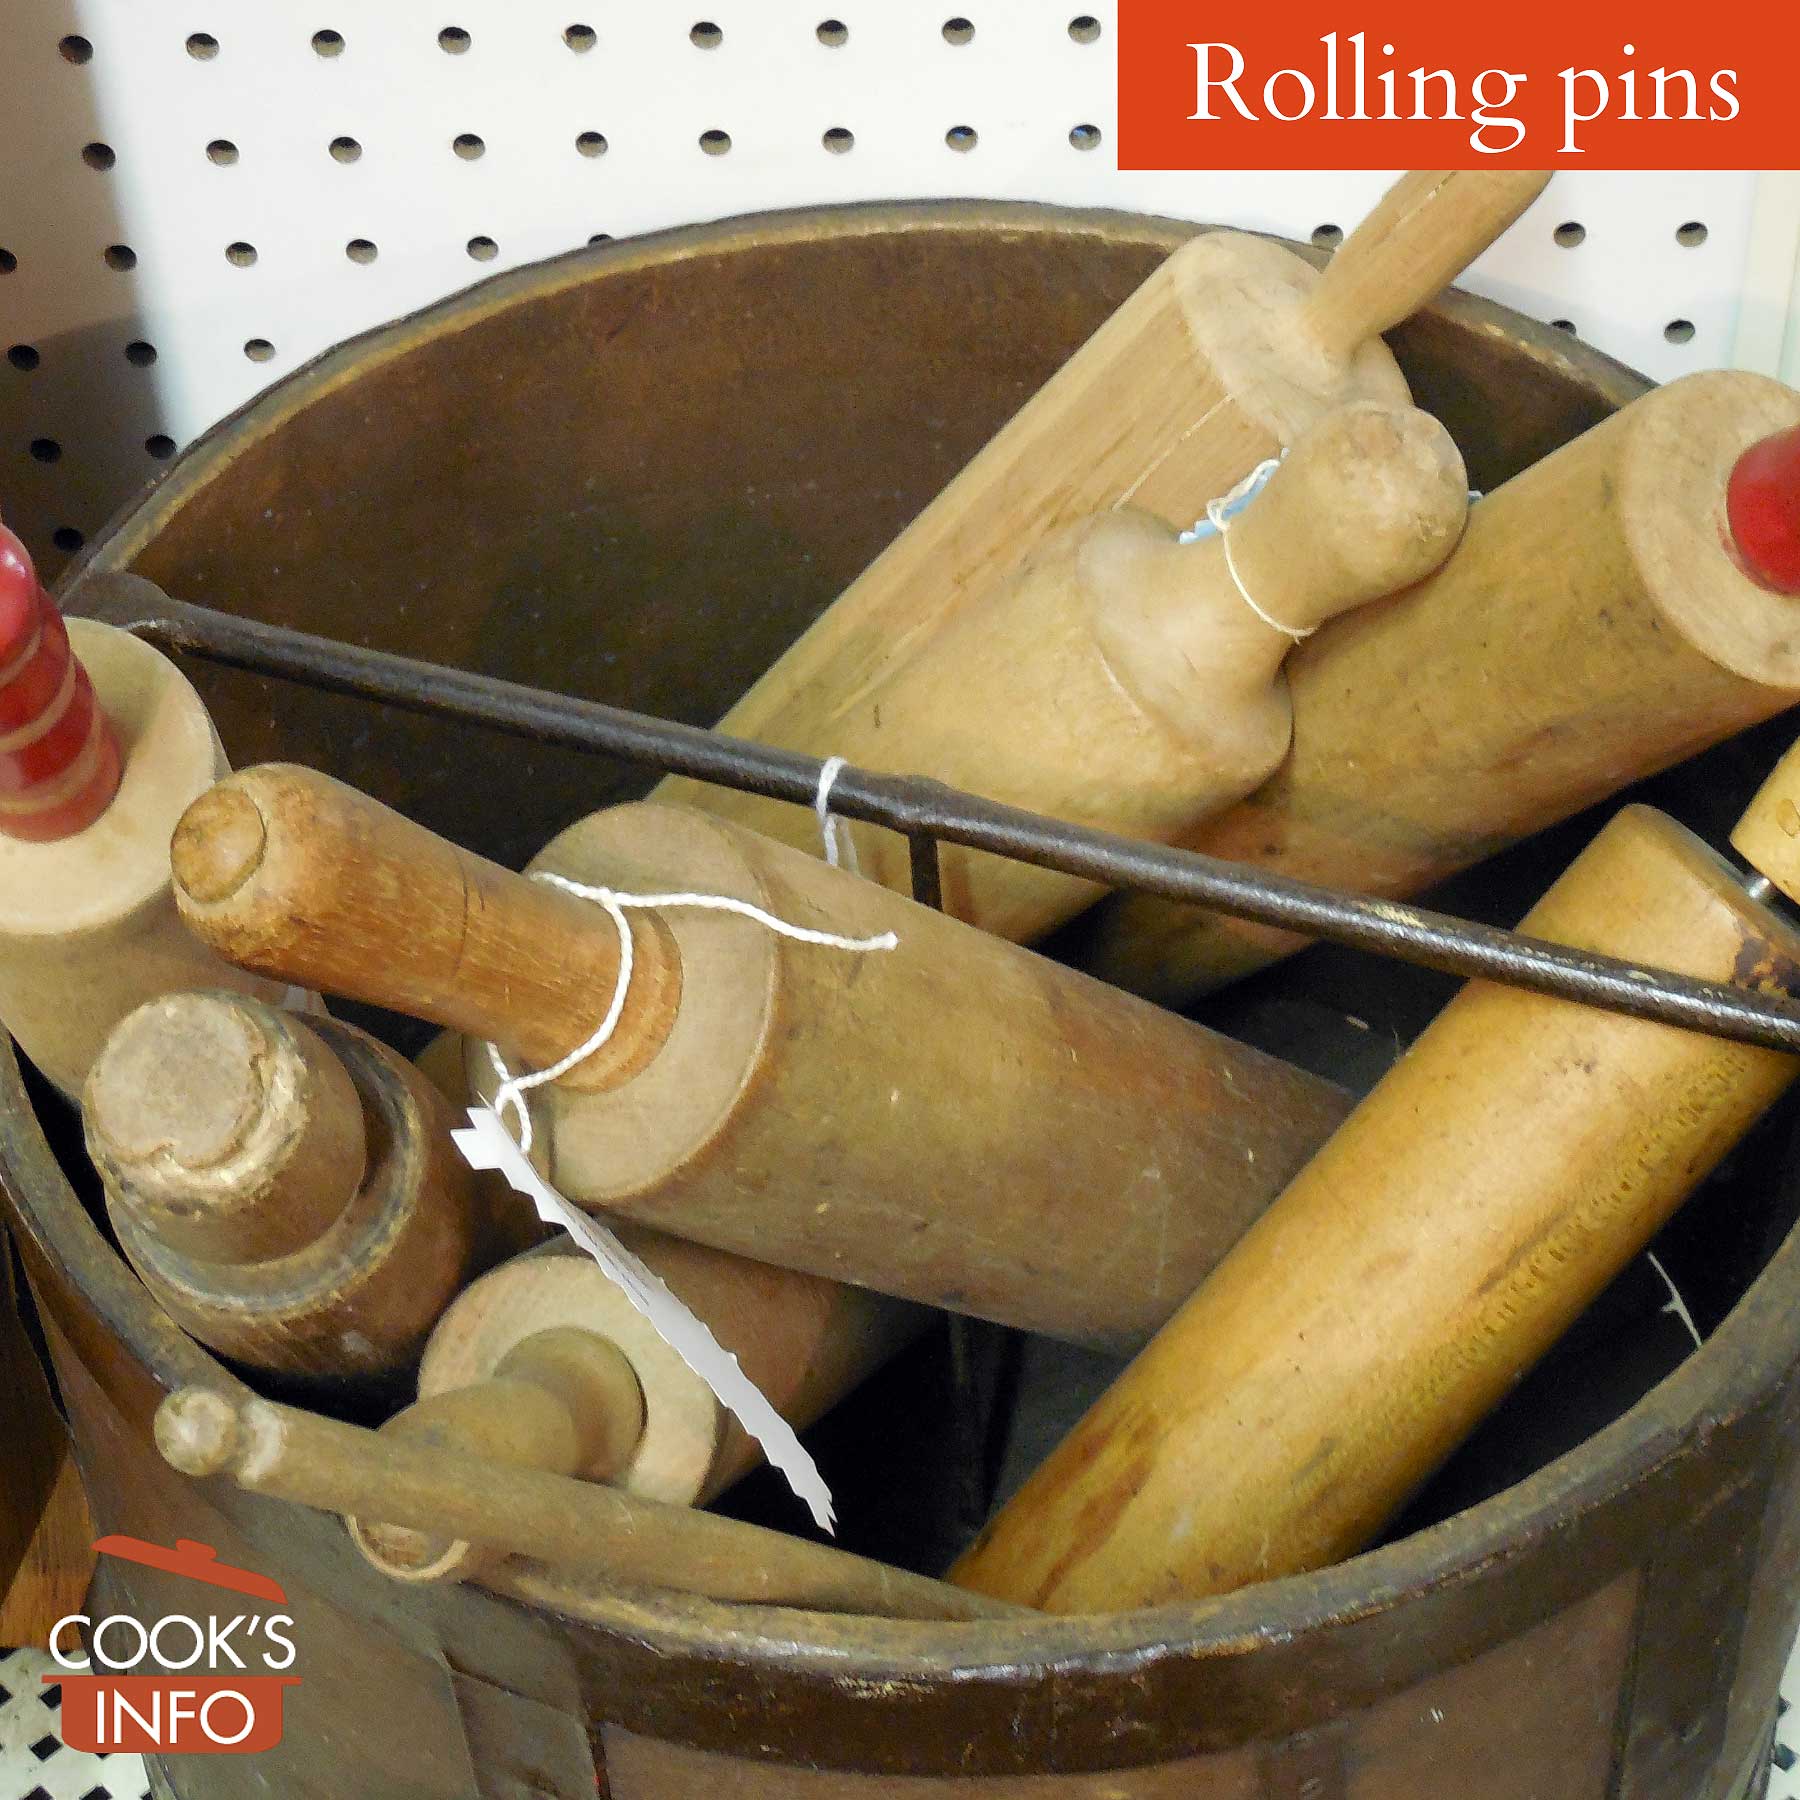 Bucket of rolling pins